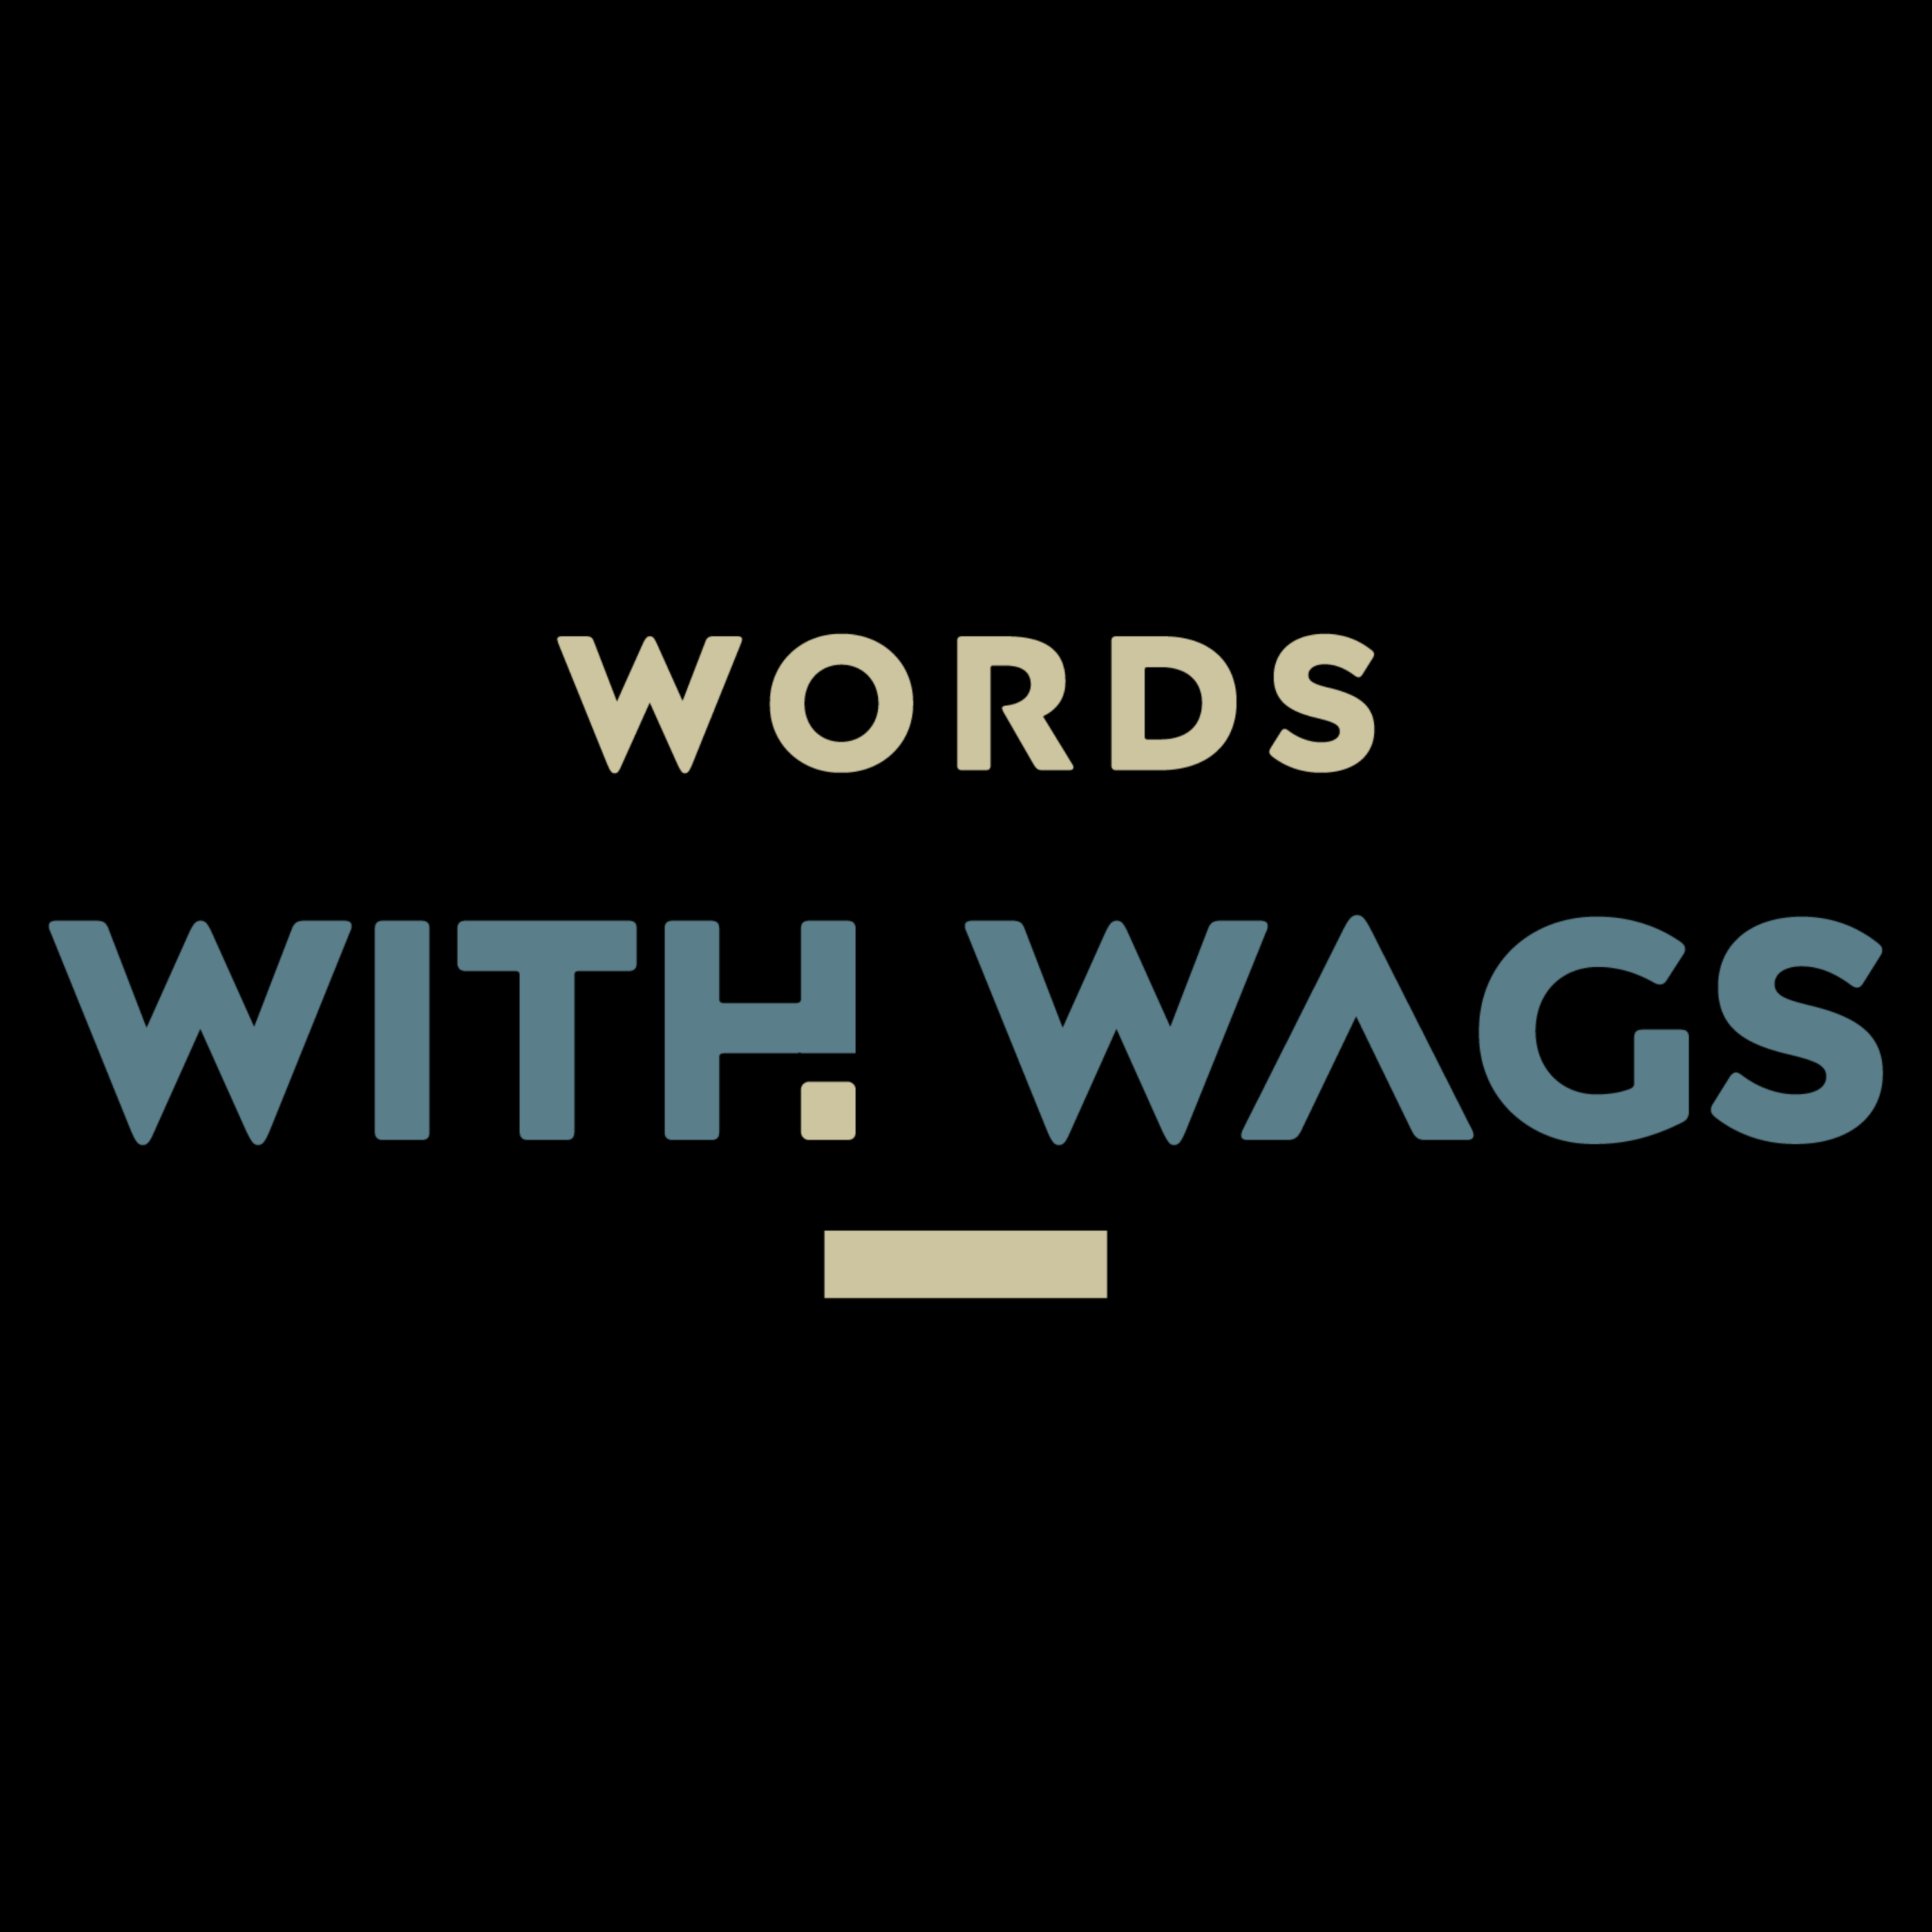 Words With Wags